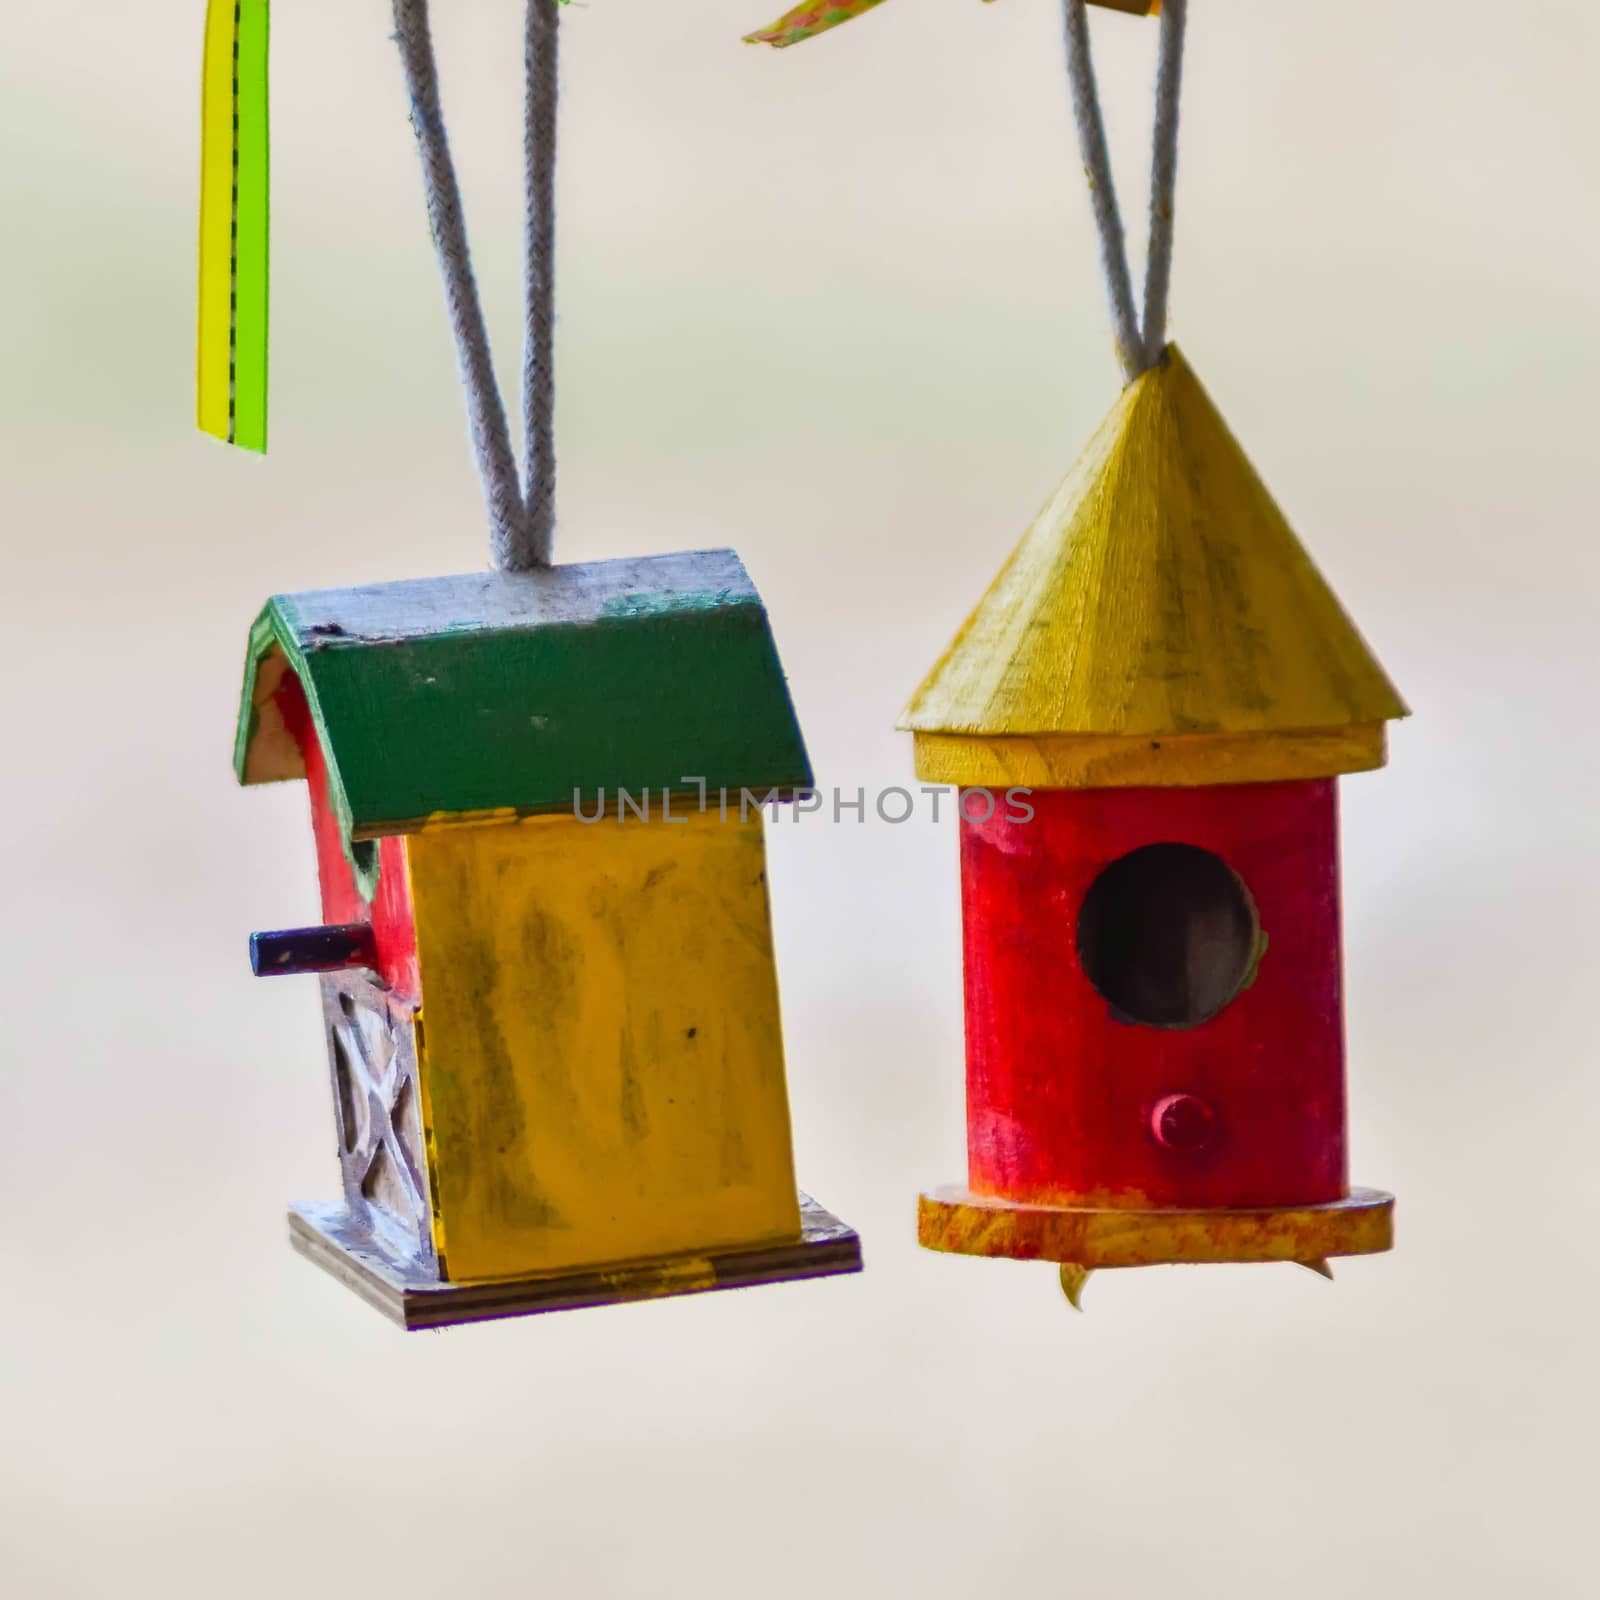 little colorful bird houses by digidreamgrafix